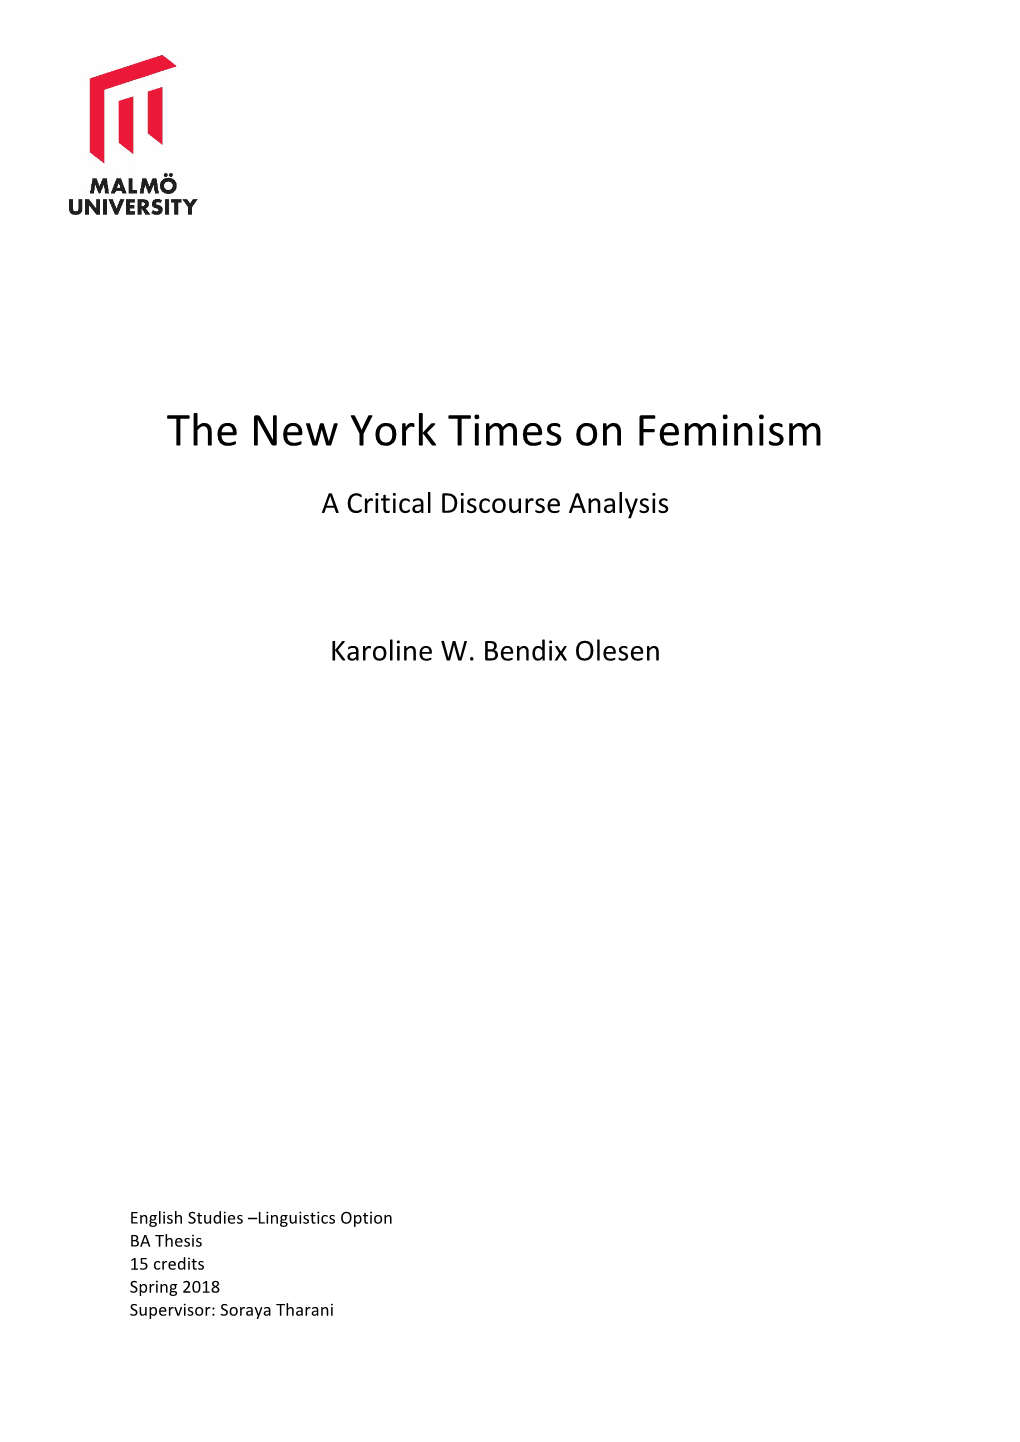 The New York Times on Feminism